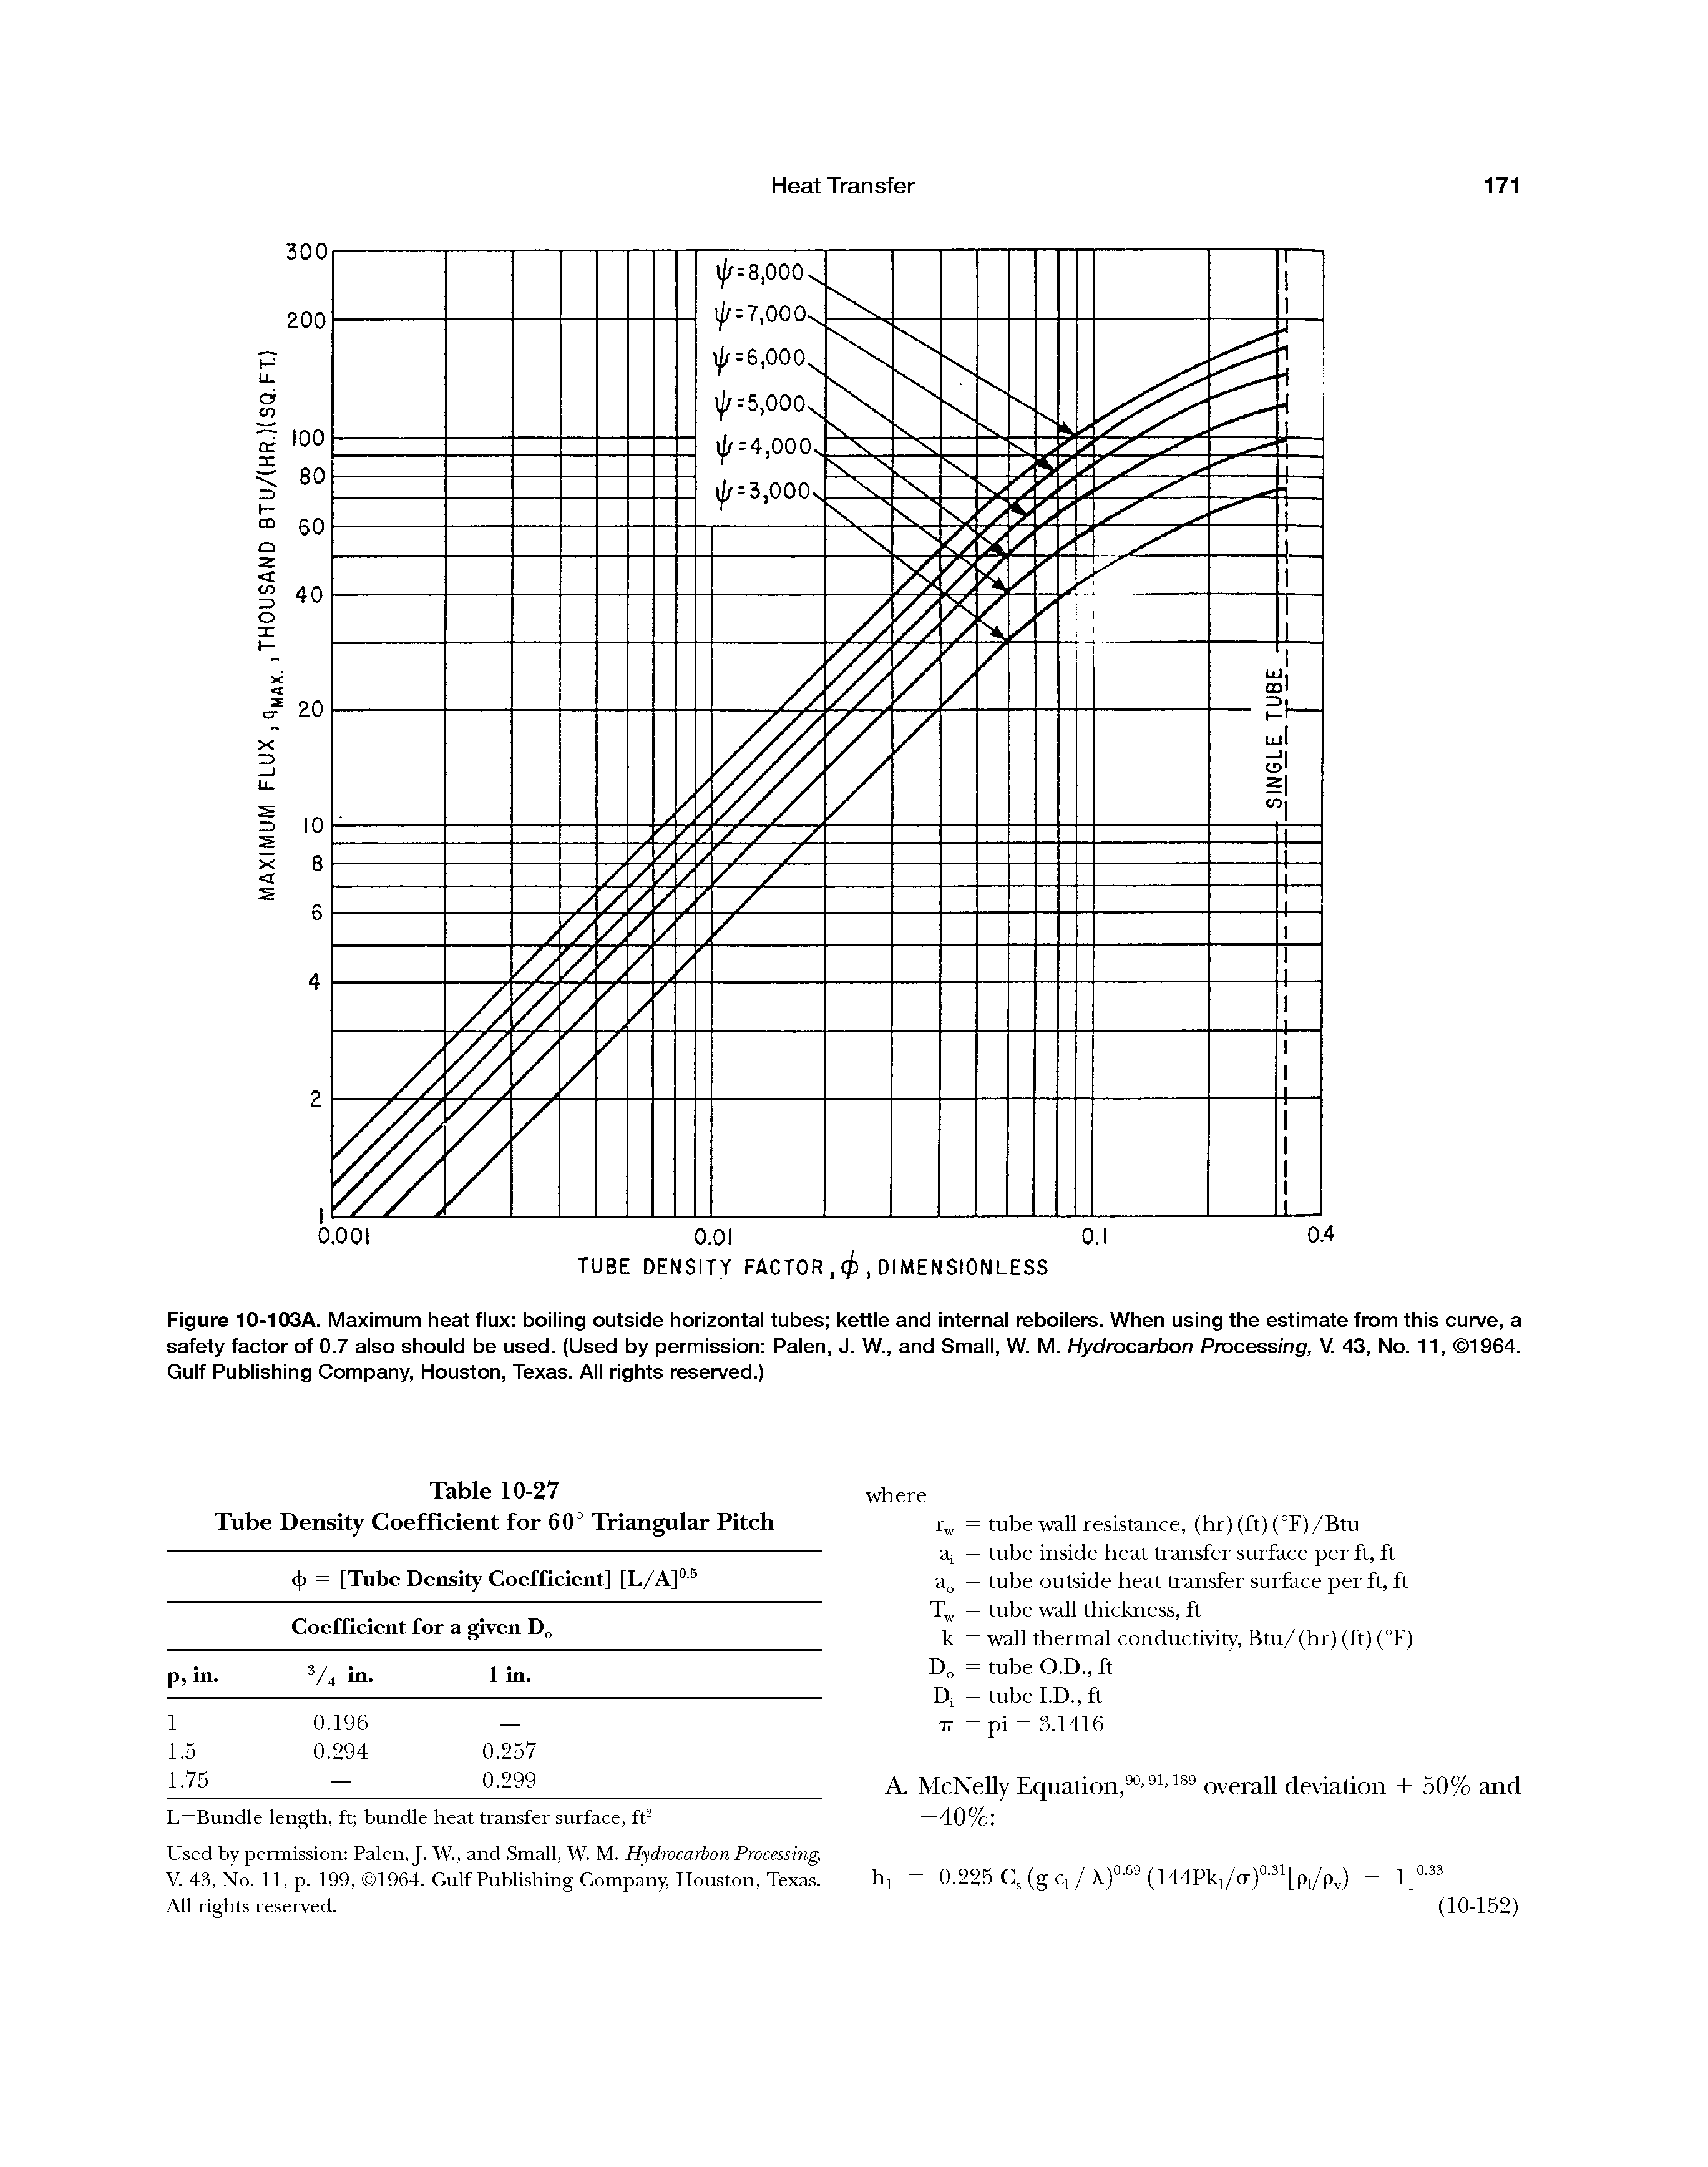 Figure 10-103A. Maximum heat flux boiling outside horizontal tubes kettle and internal reboilers. When using the estimate from this curve, a safety factor of 0.7 also should be used. (Used by permission Palen, J. W., and Small, W. M. Hydrocarbon Processing, V. 43, No. 11, 1964. Gulf Publishing Company, Houston, Texas. All rights reserved.)...